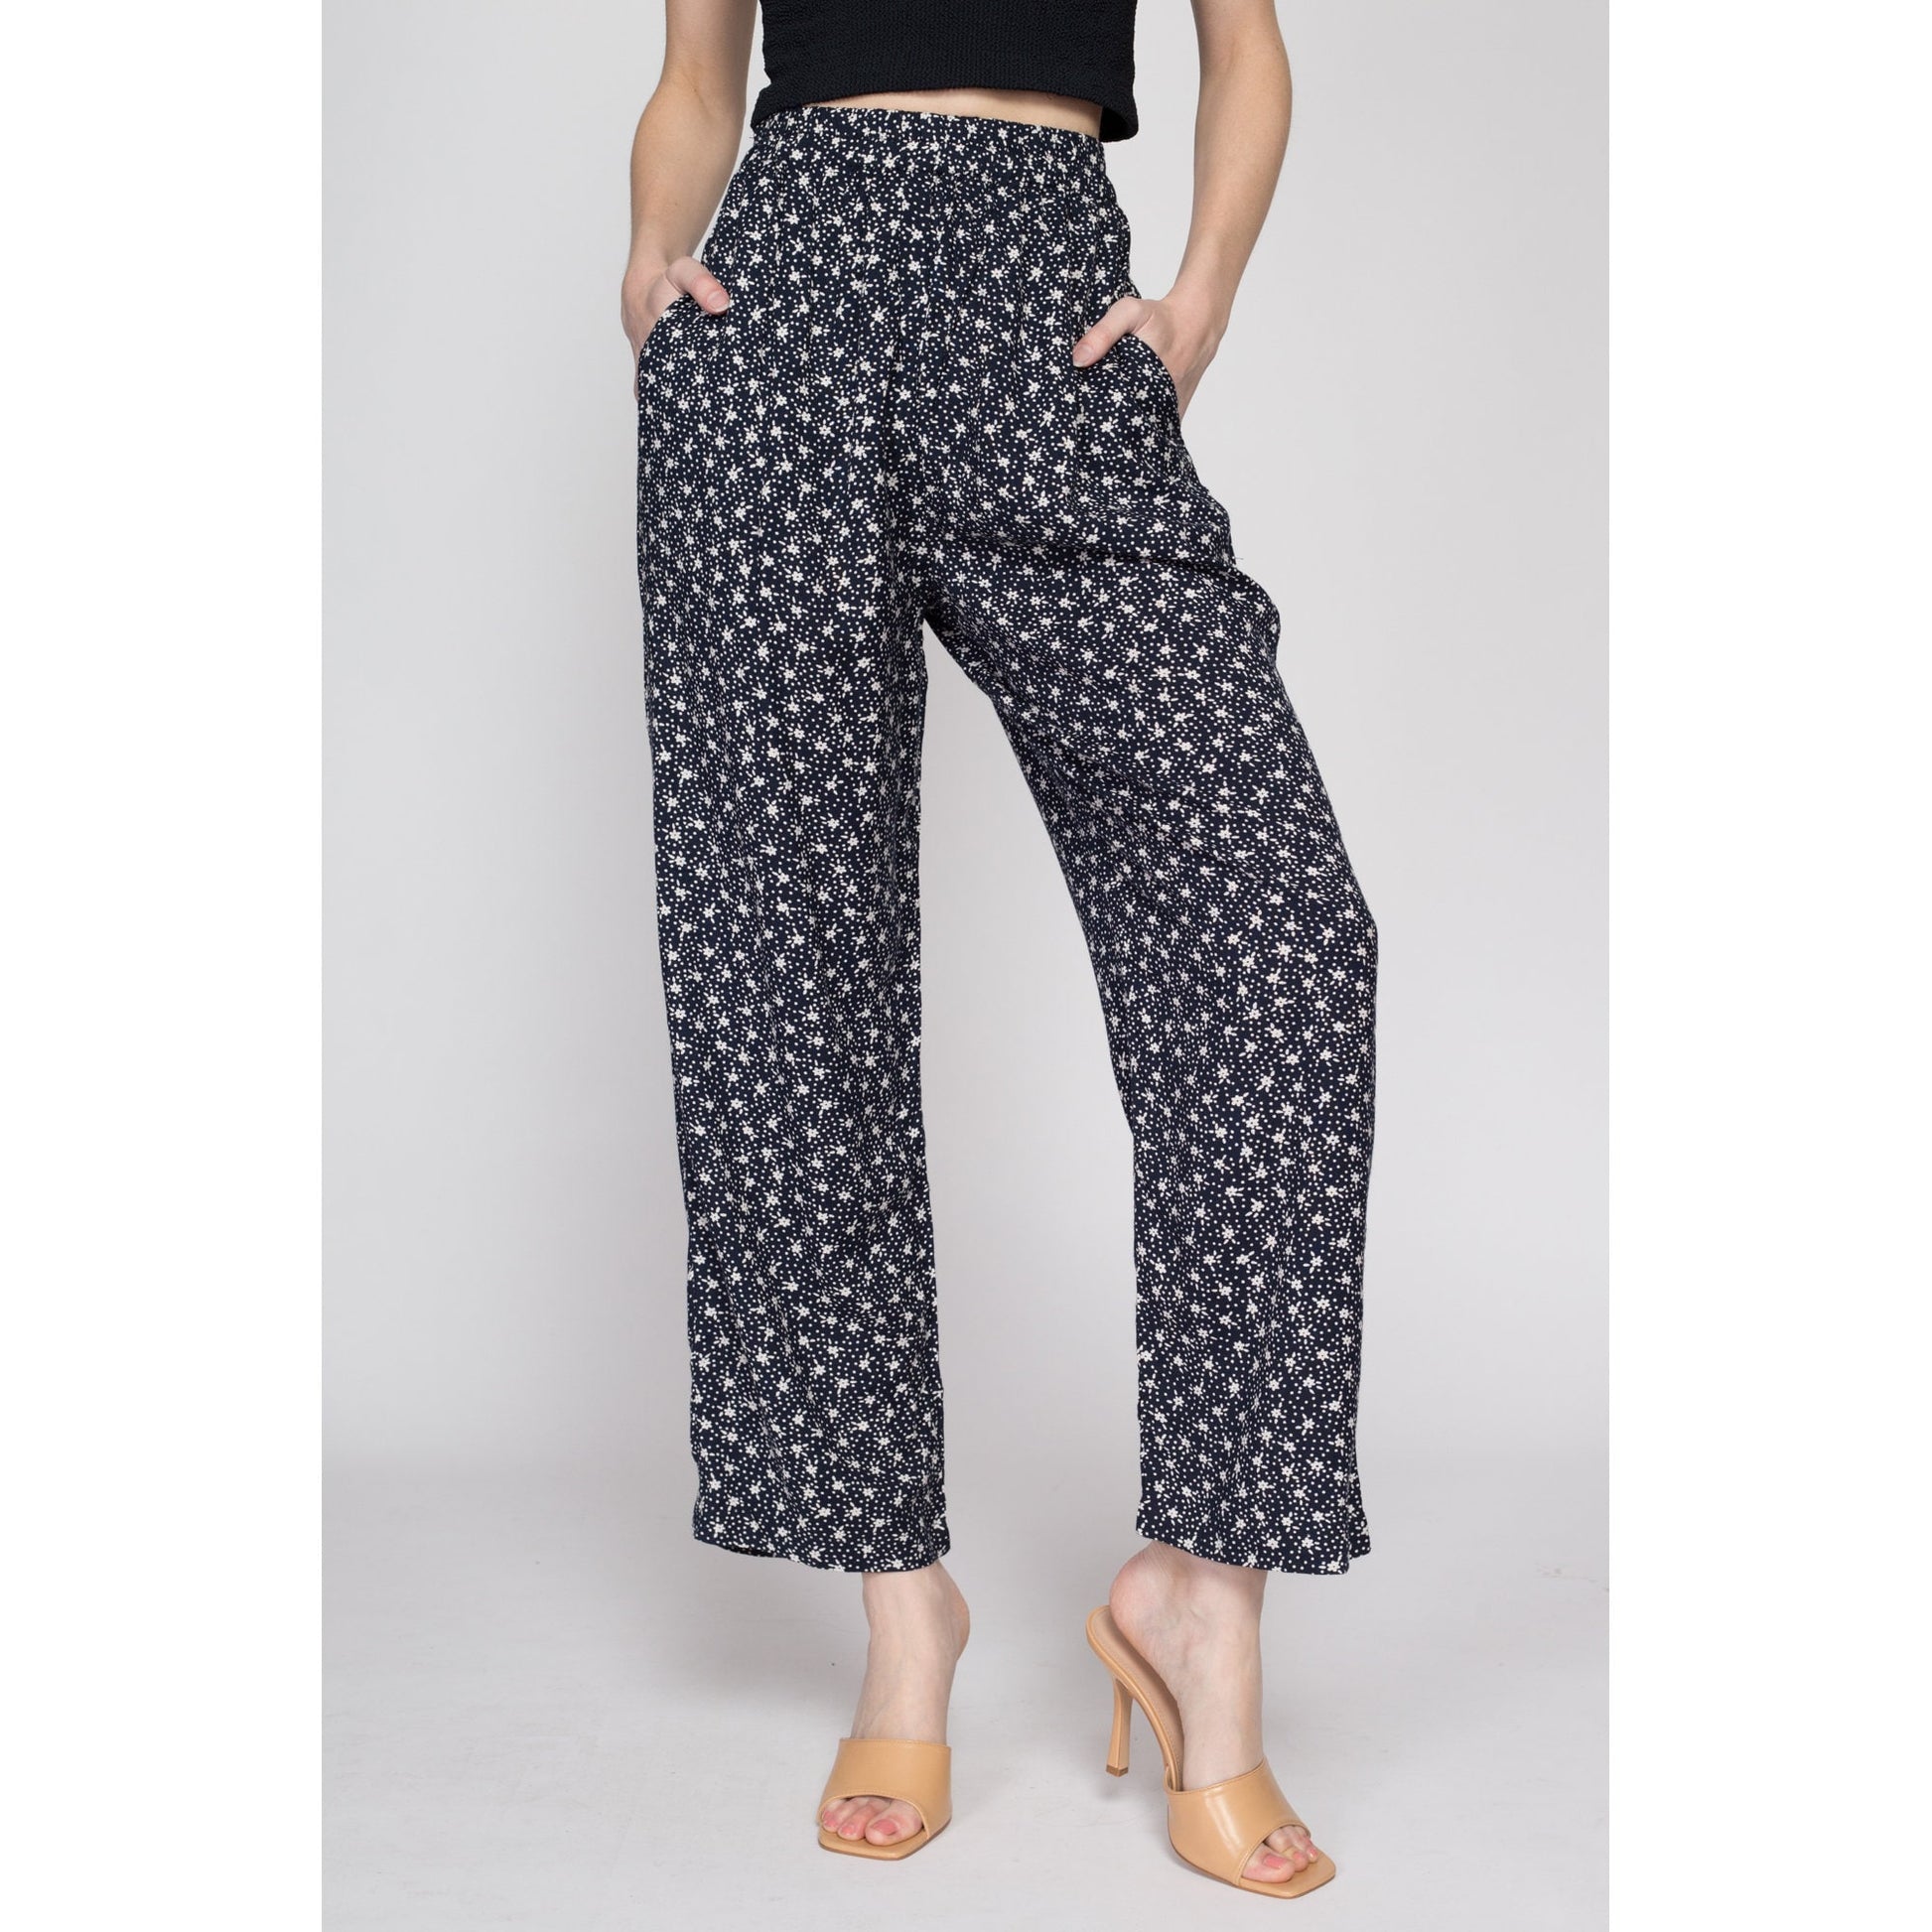 Small 90s Navy Blue Floral Lounge Pants 23-27 – Flying Apple Vintage